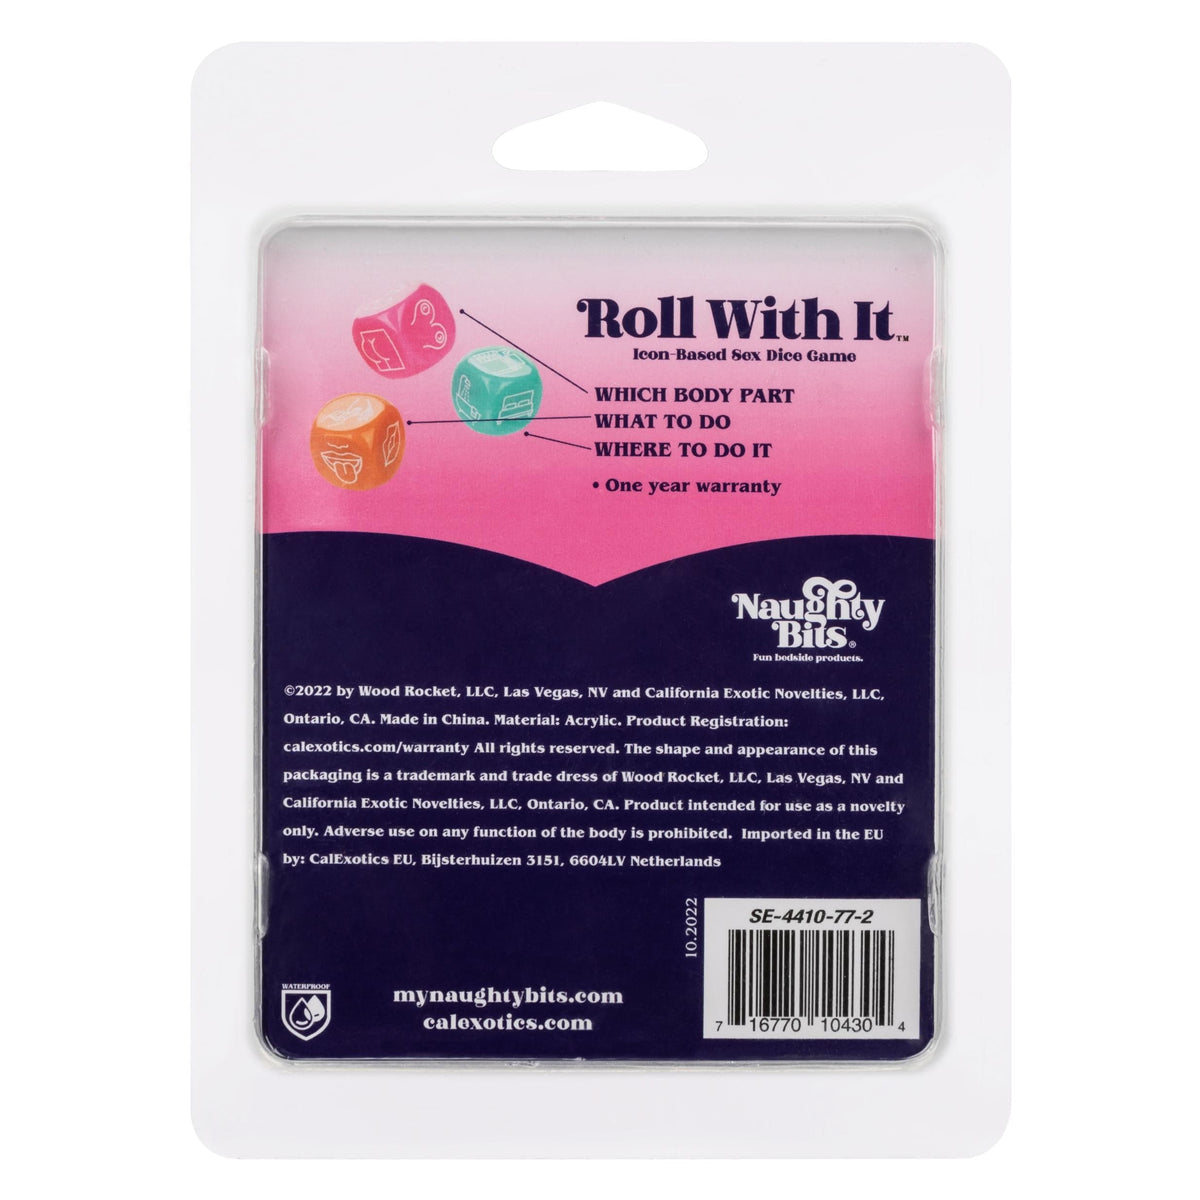 naughty bits roll with it icon based sex dice game